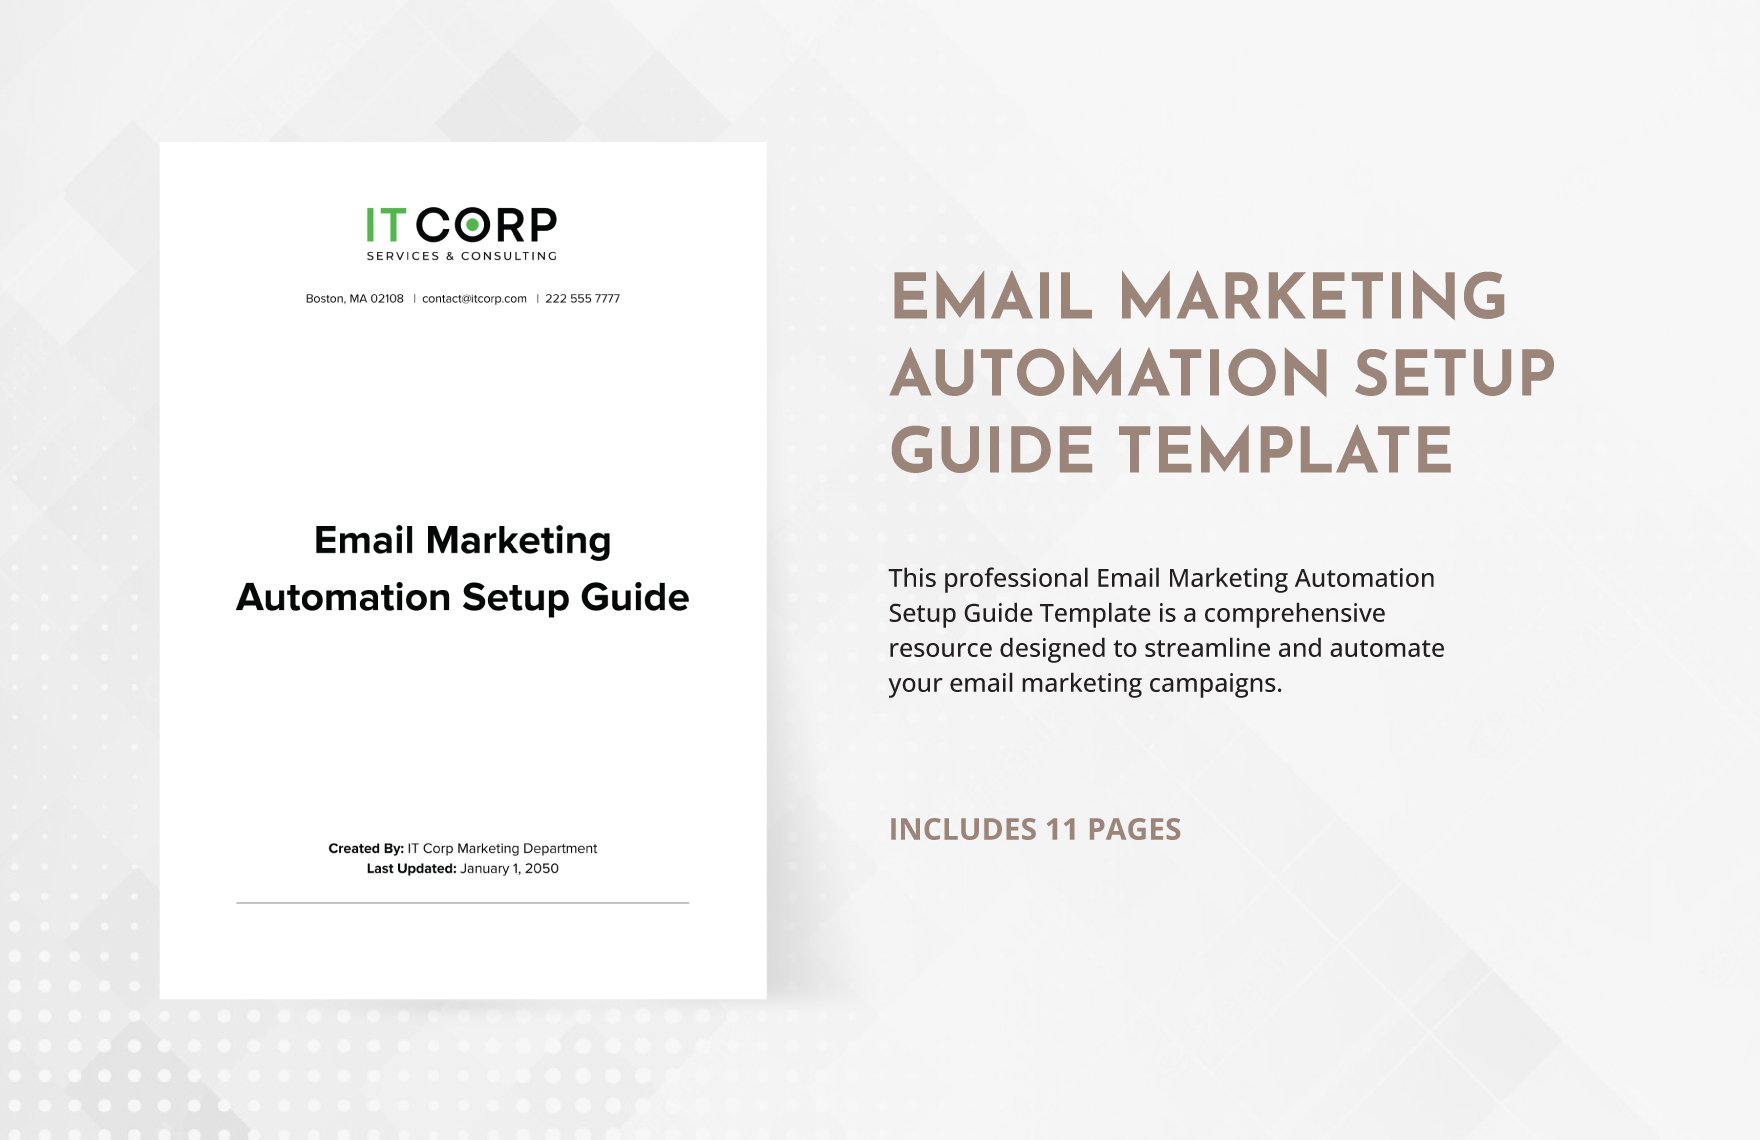 Email Marketing Automation Setup Guide Template in Word, Google Docs, PDF